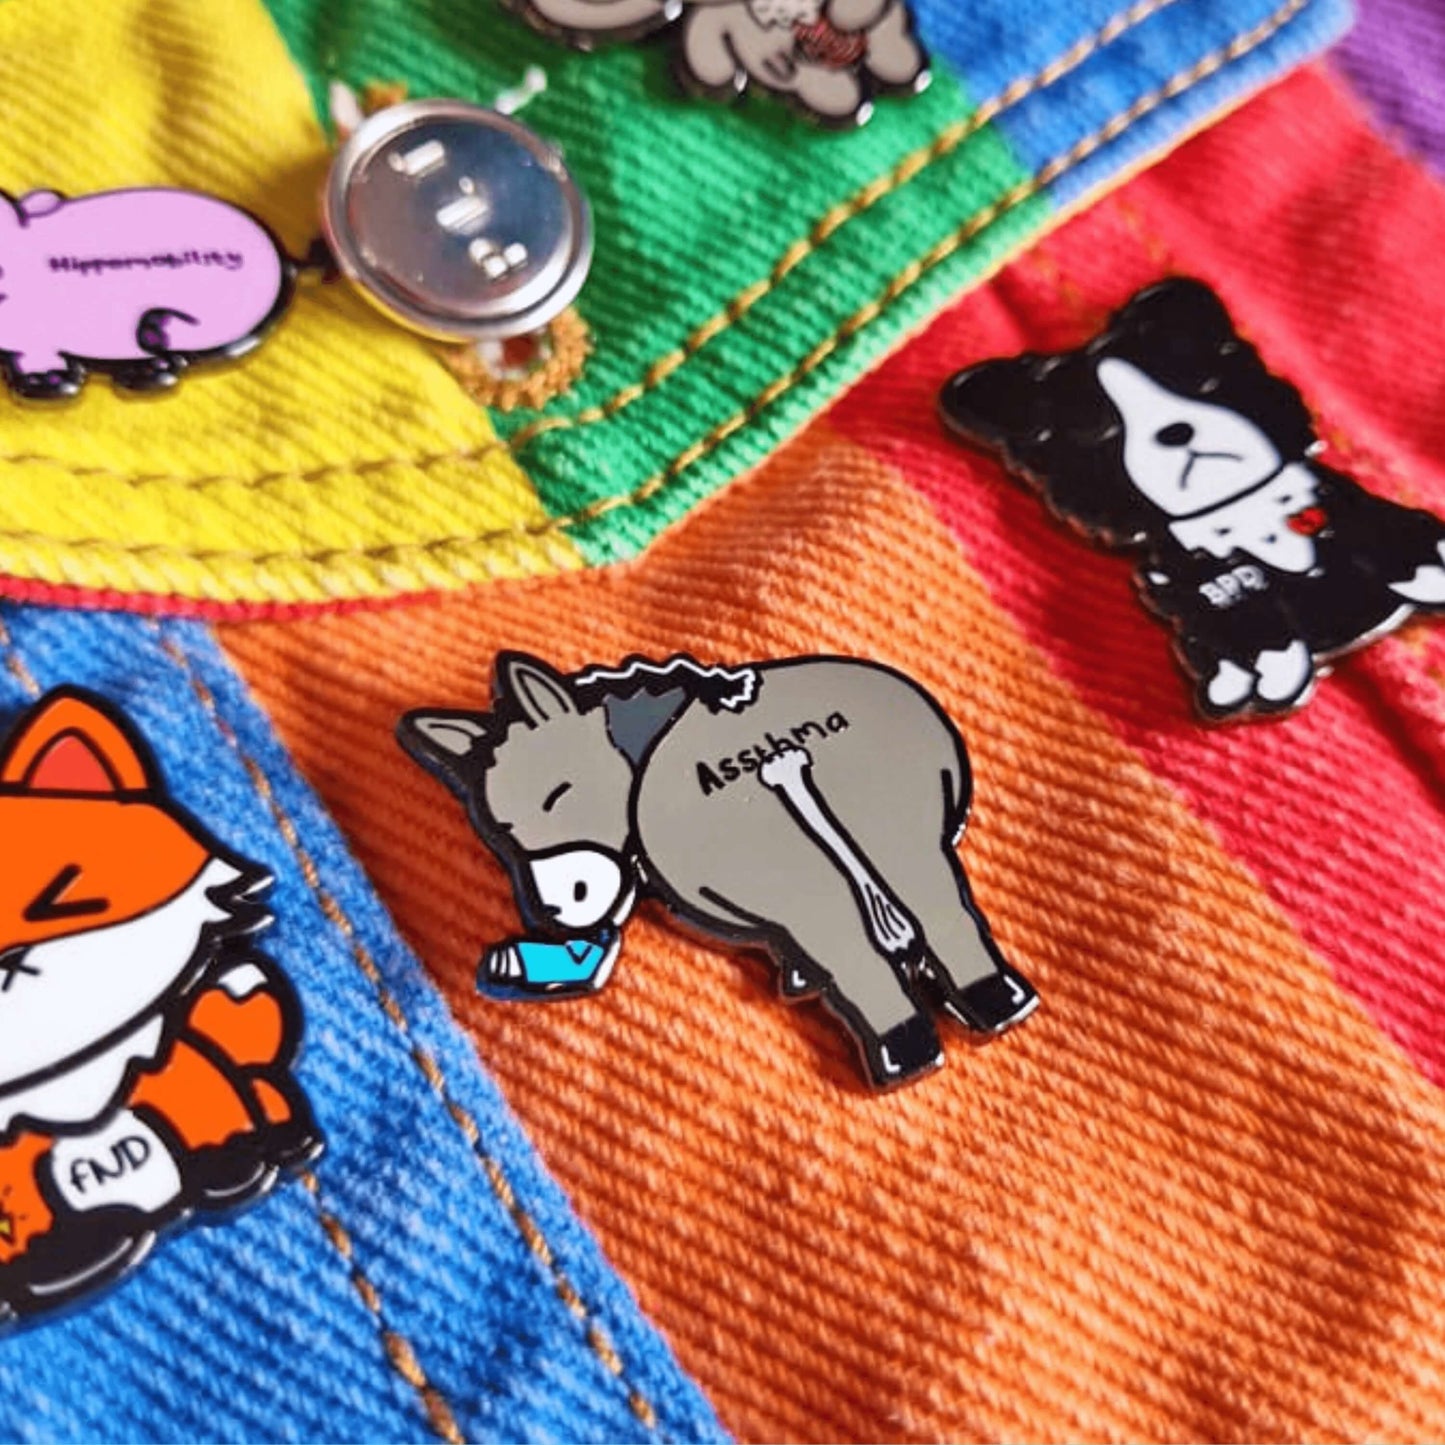 Assthma Enamel Pin - Asthma shown on a rainbow denim jacket with other innabox pins. A grey donkey ass showing its behind with a blue asthma pump in its mouth and the word Assthma across its behind. The pin is designed to raise awareness for asthma.